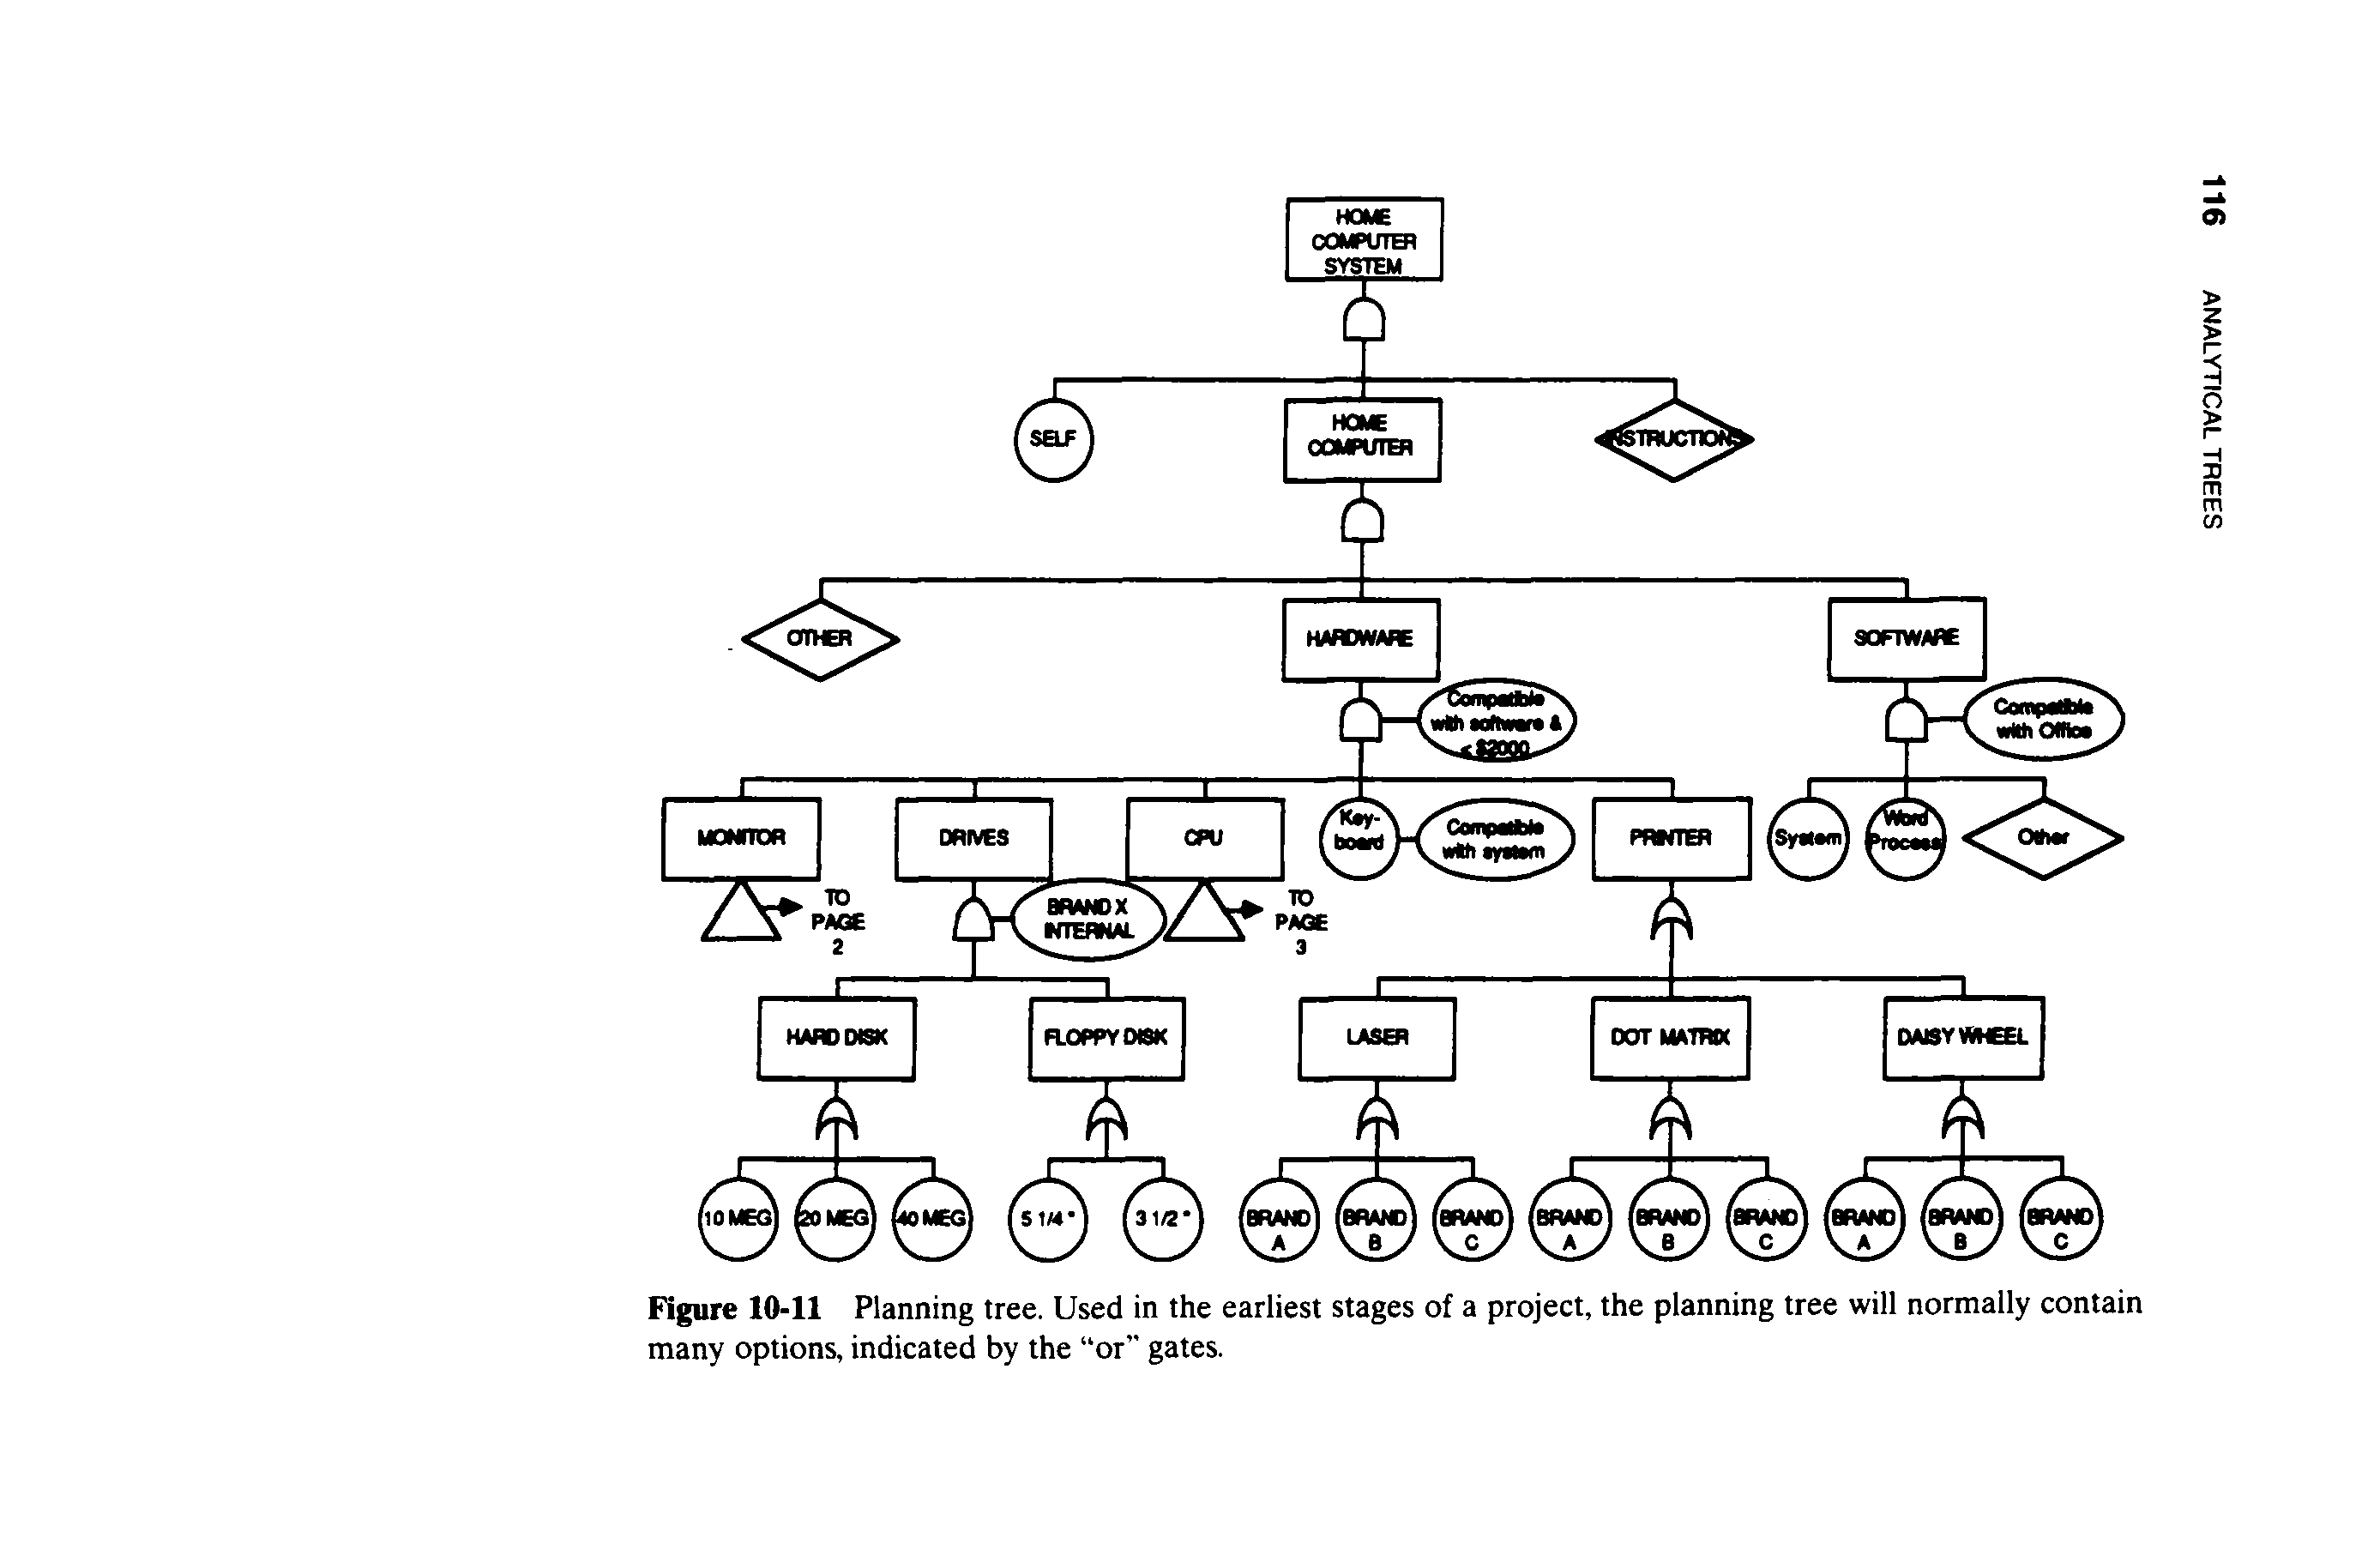 Figure 10-11 Planning tree. Used in the earliest stages of a project, the planning tree will normally contain many options, indicated by the or gates.